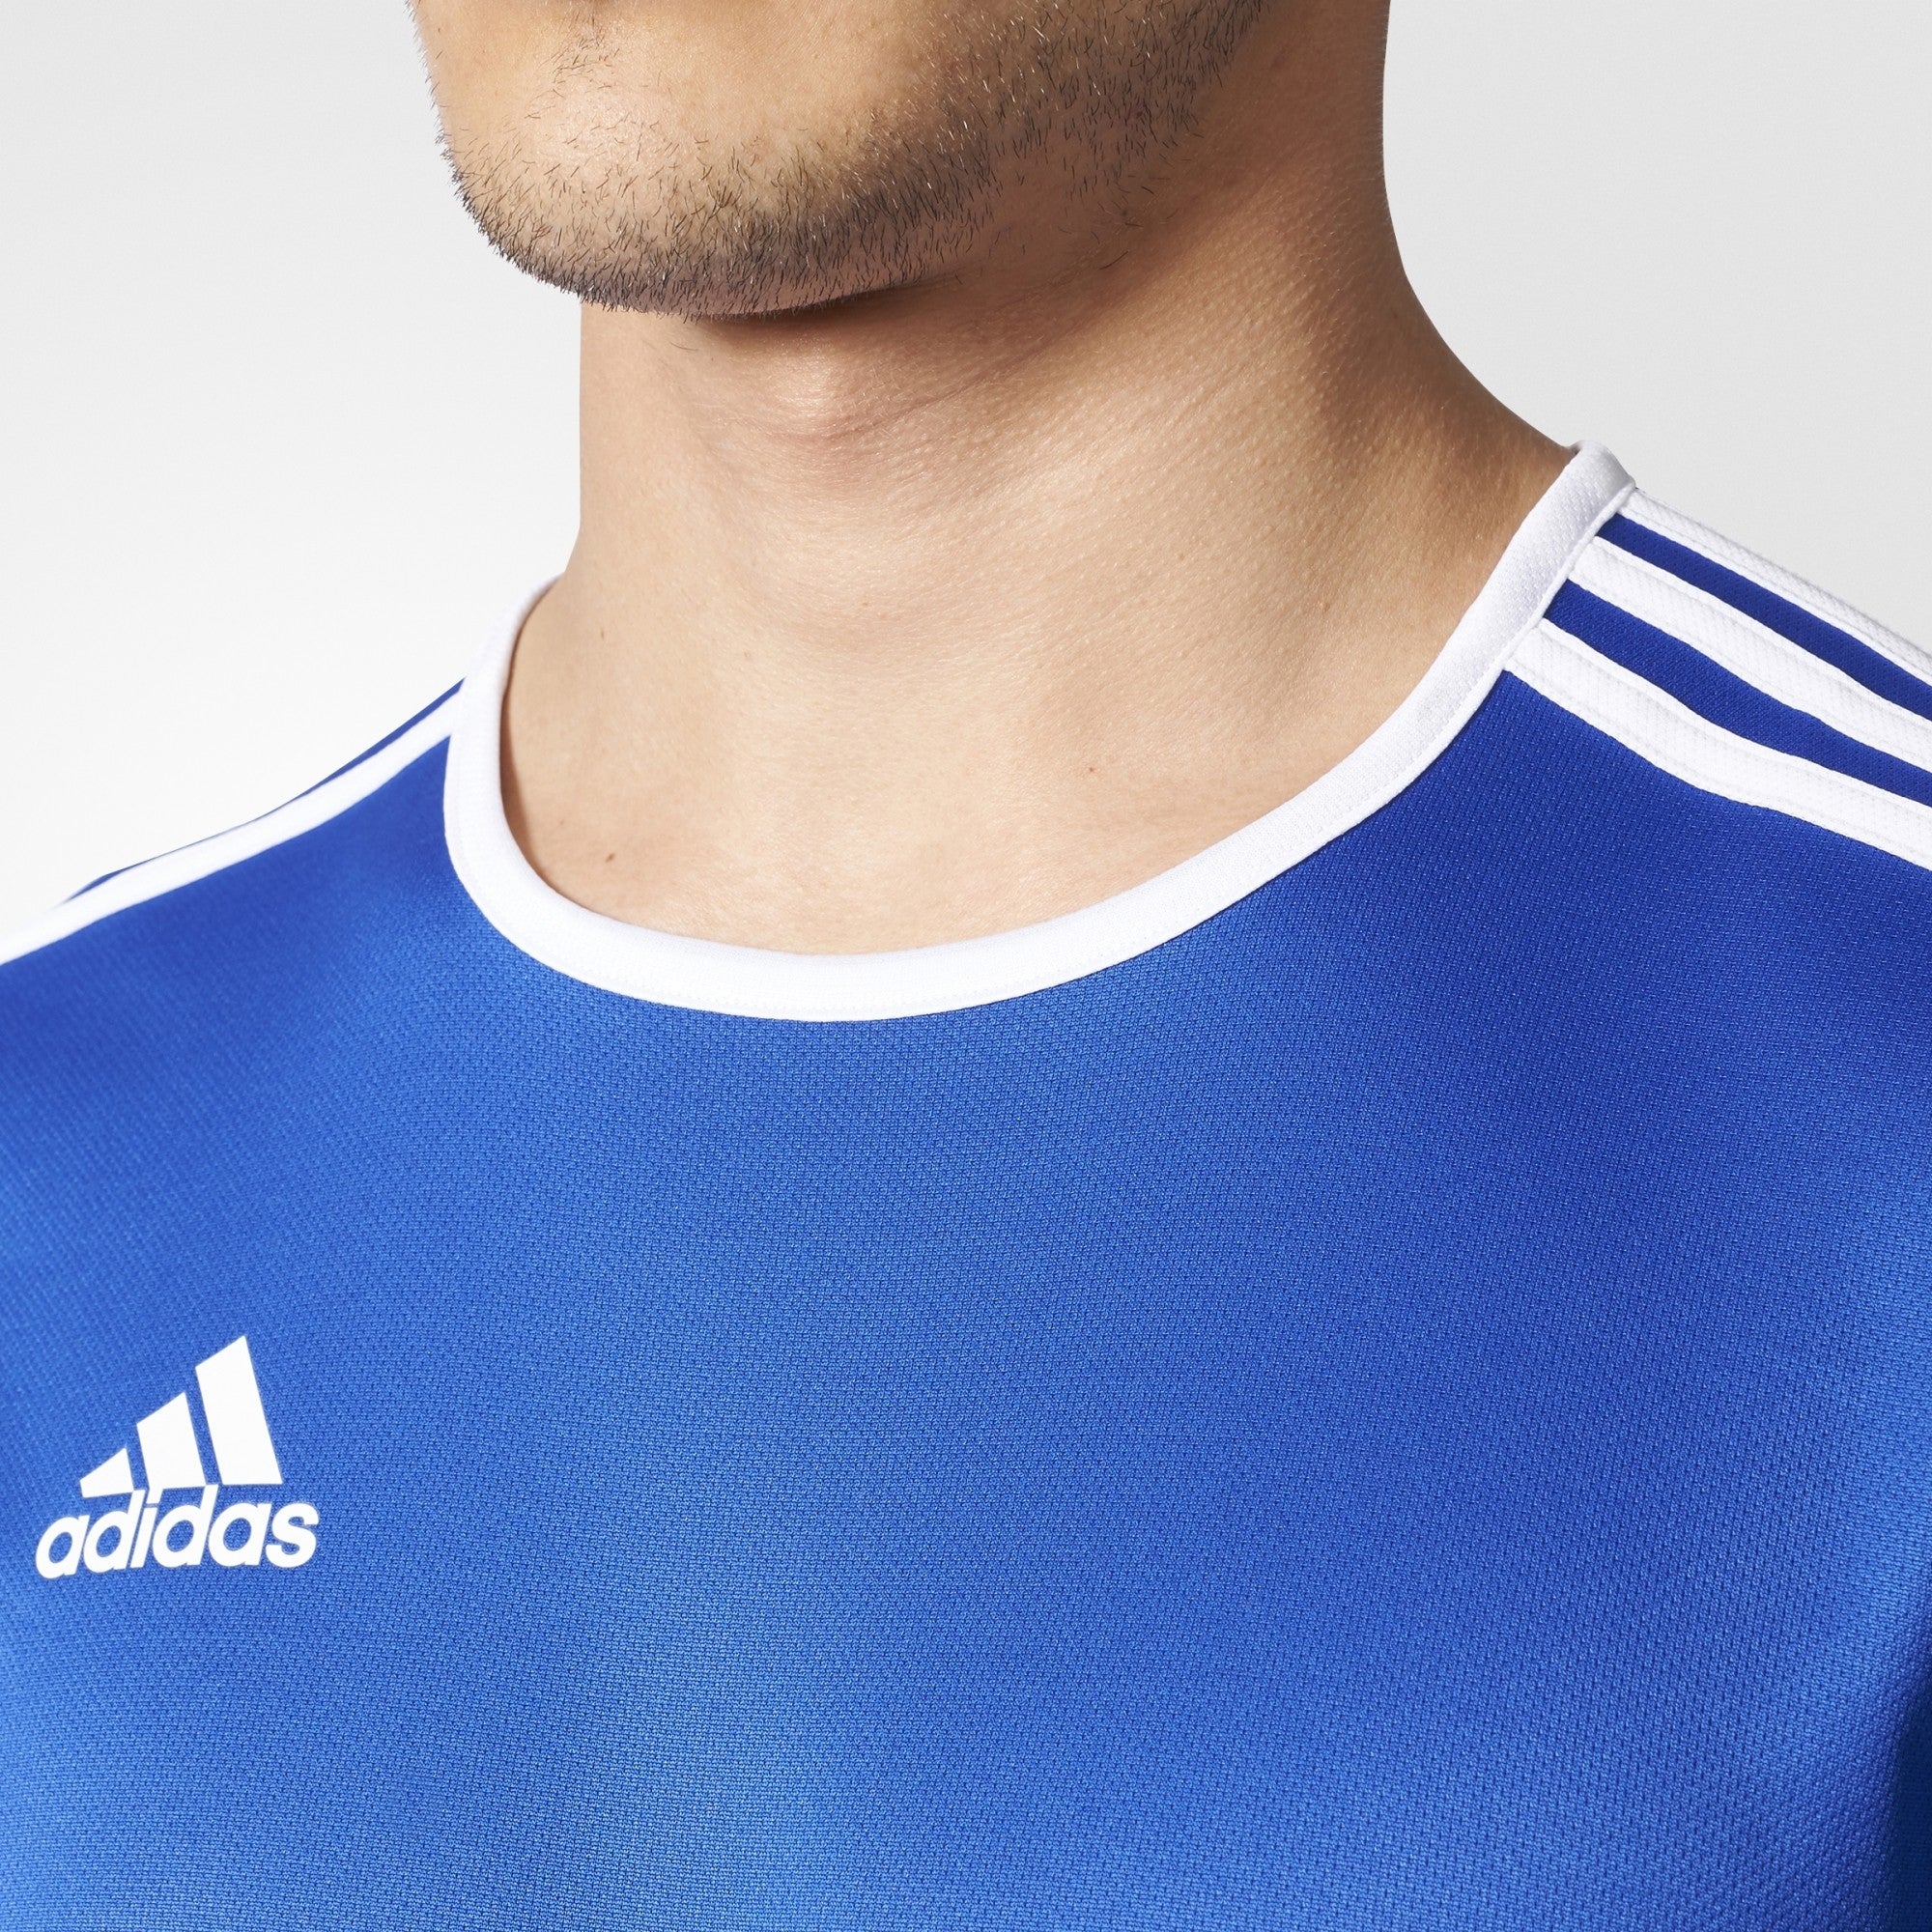 Total Football Direct - Adidas Entrada 18 Jersey - Bold Blue / White